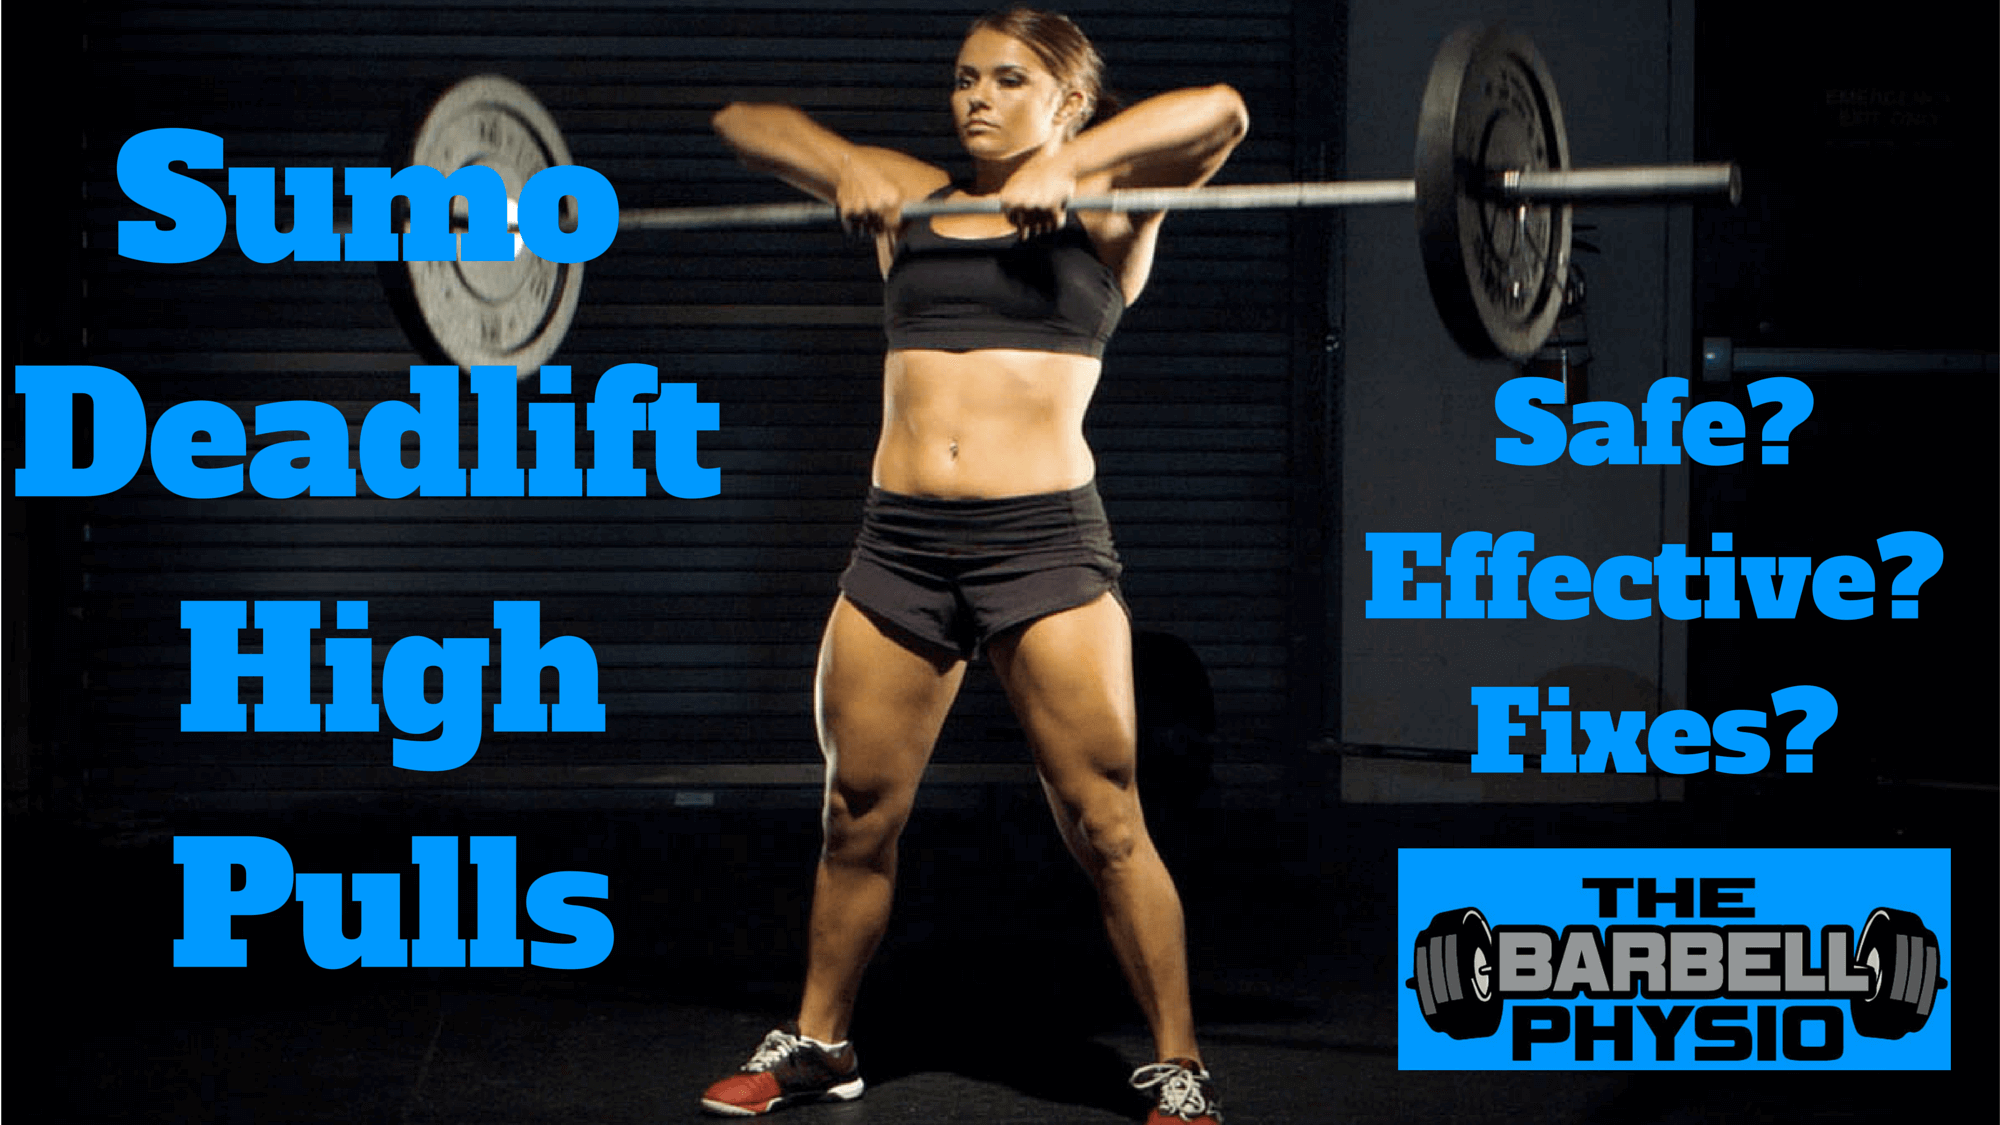 Featured image for “Sumo Deadlift High Pull Safety, Effectiveness, & Fixes”